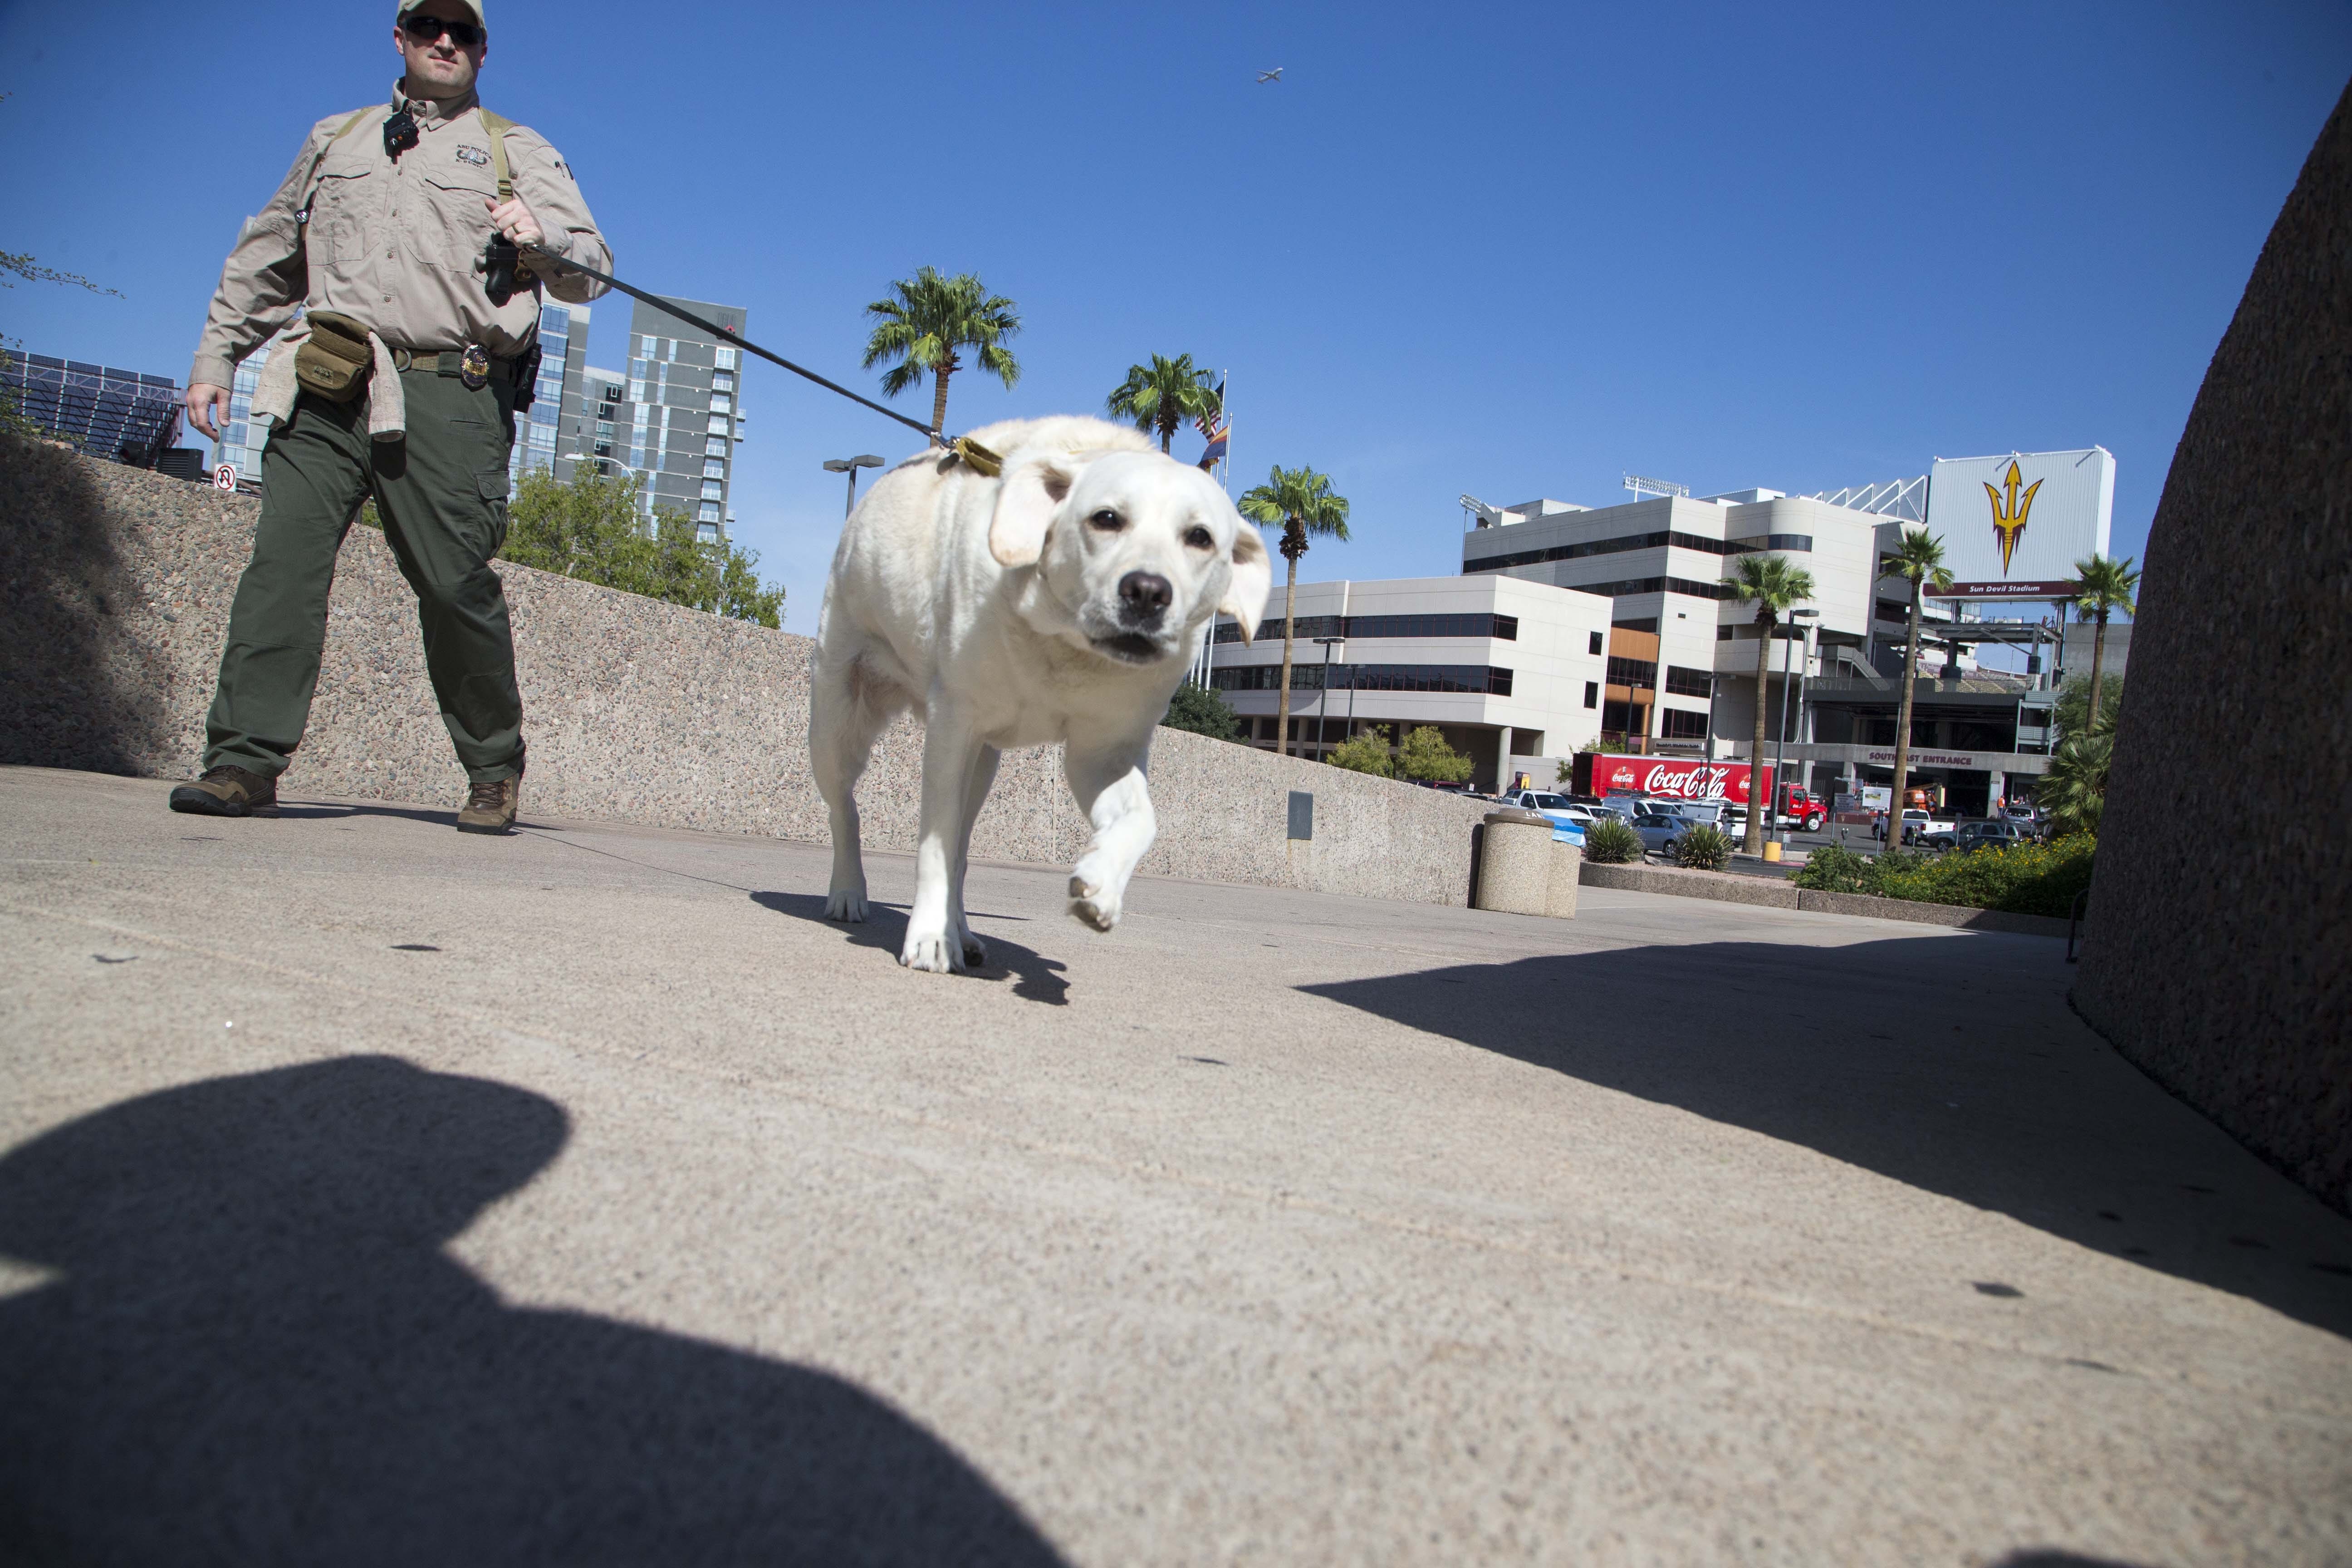 5 ways to fight crime while walking your dog